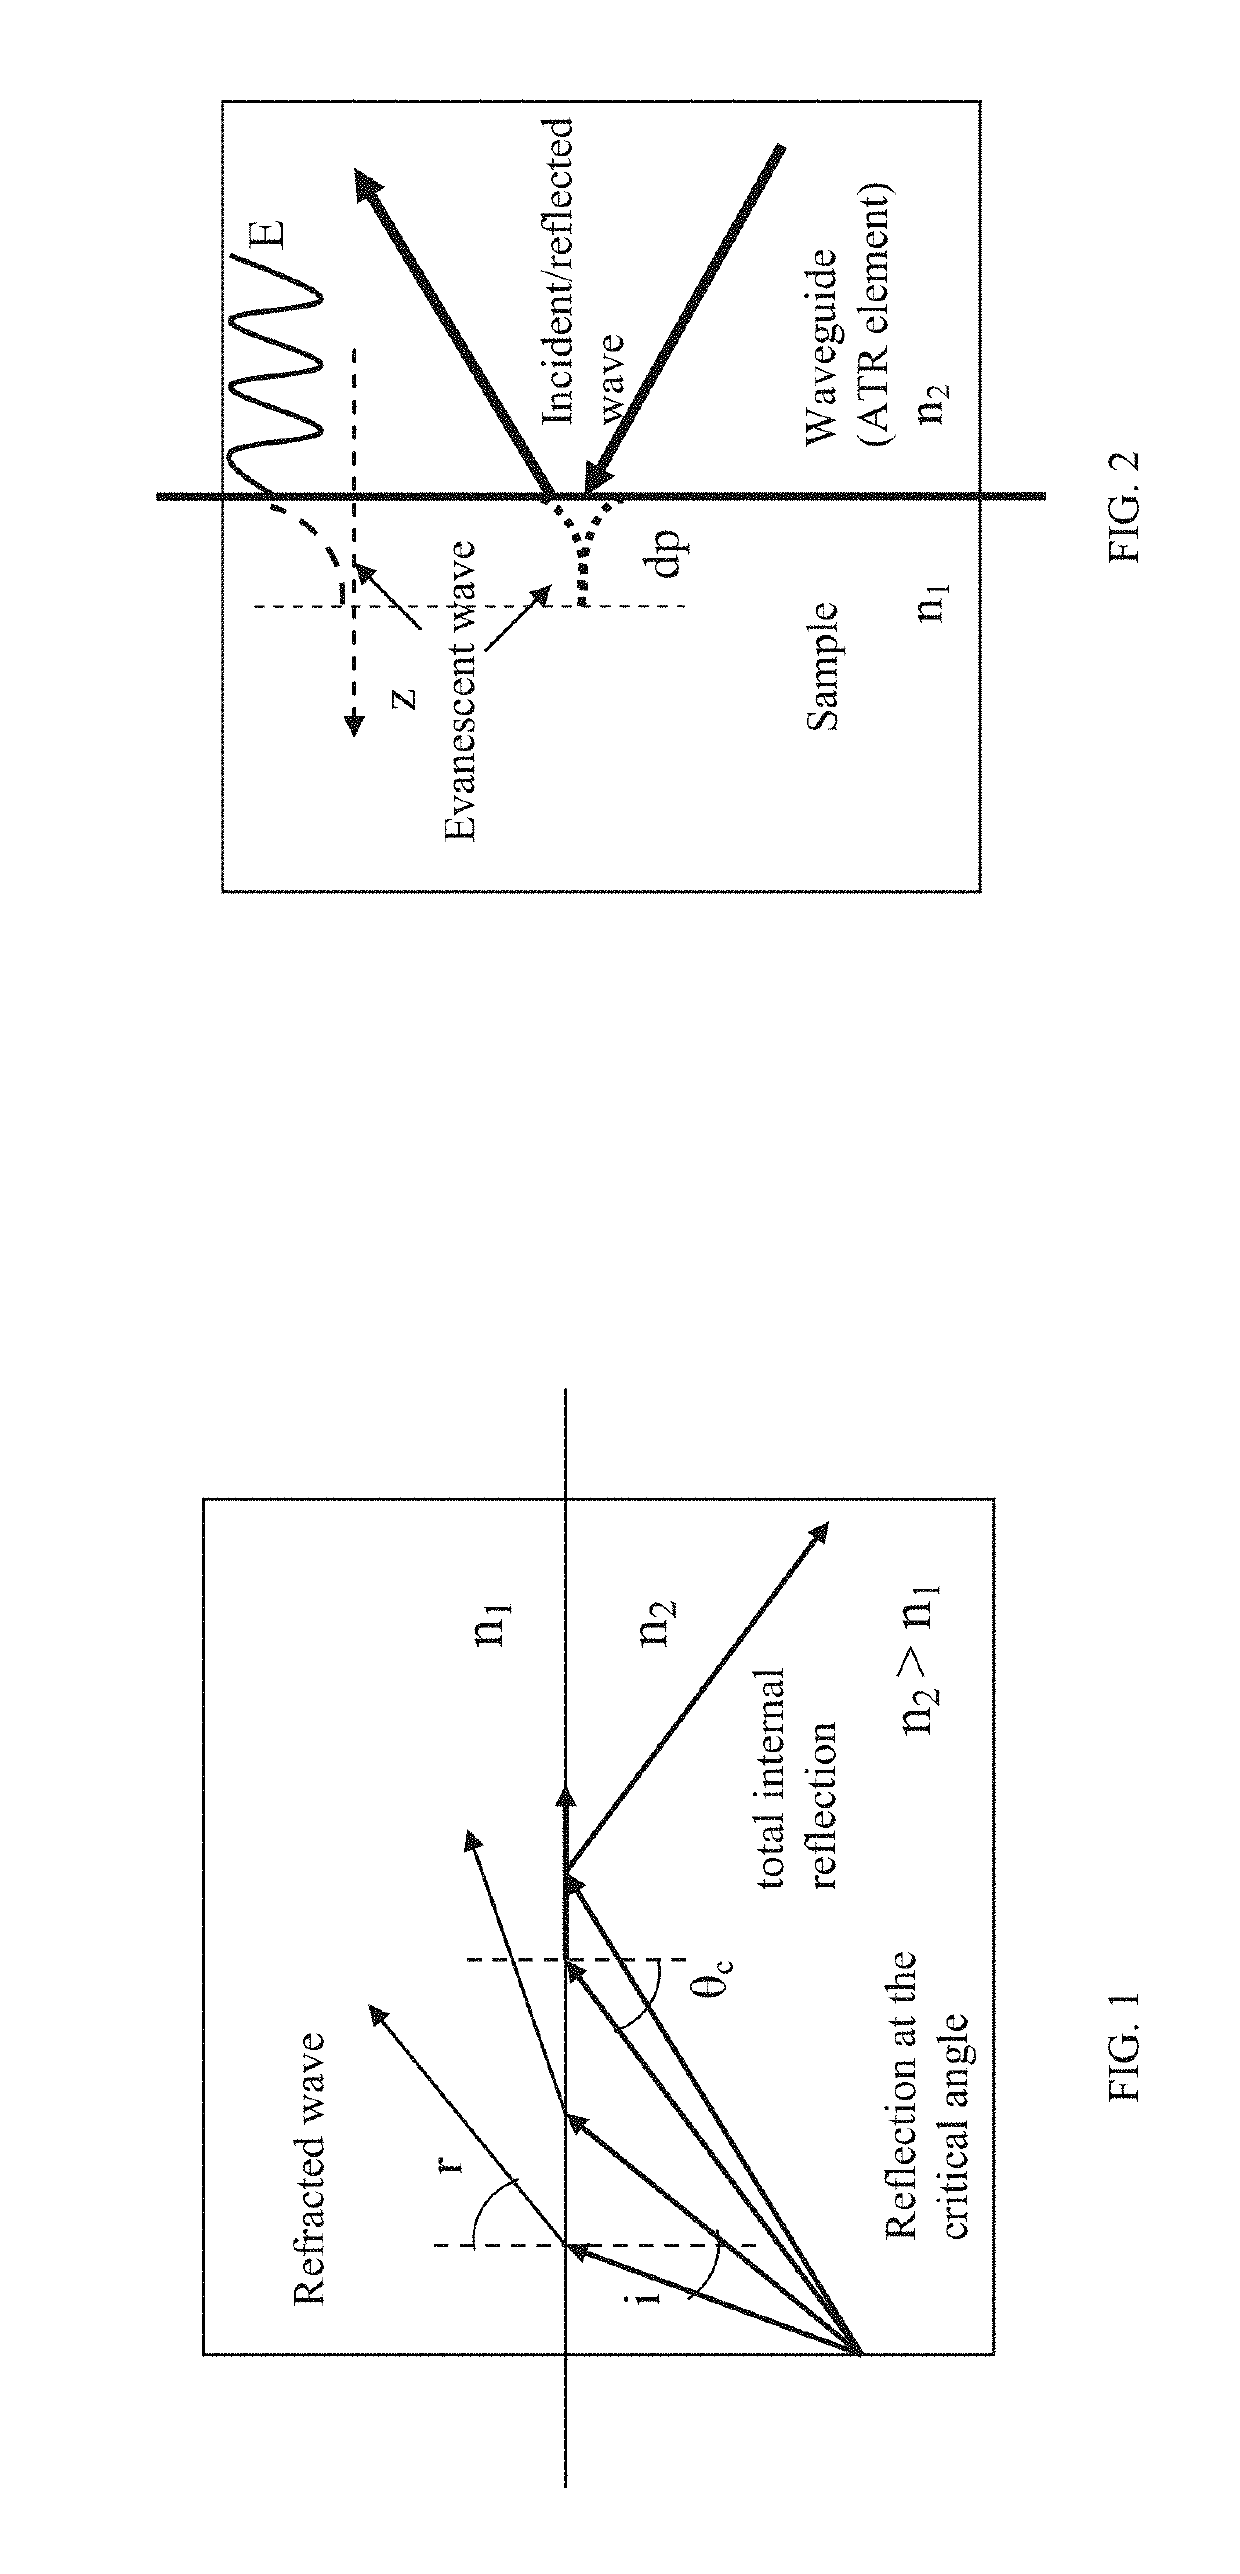 Device and method for tissue diagnosis in real-time